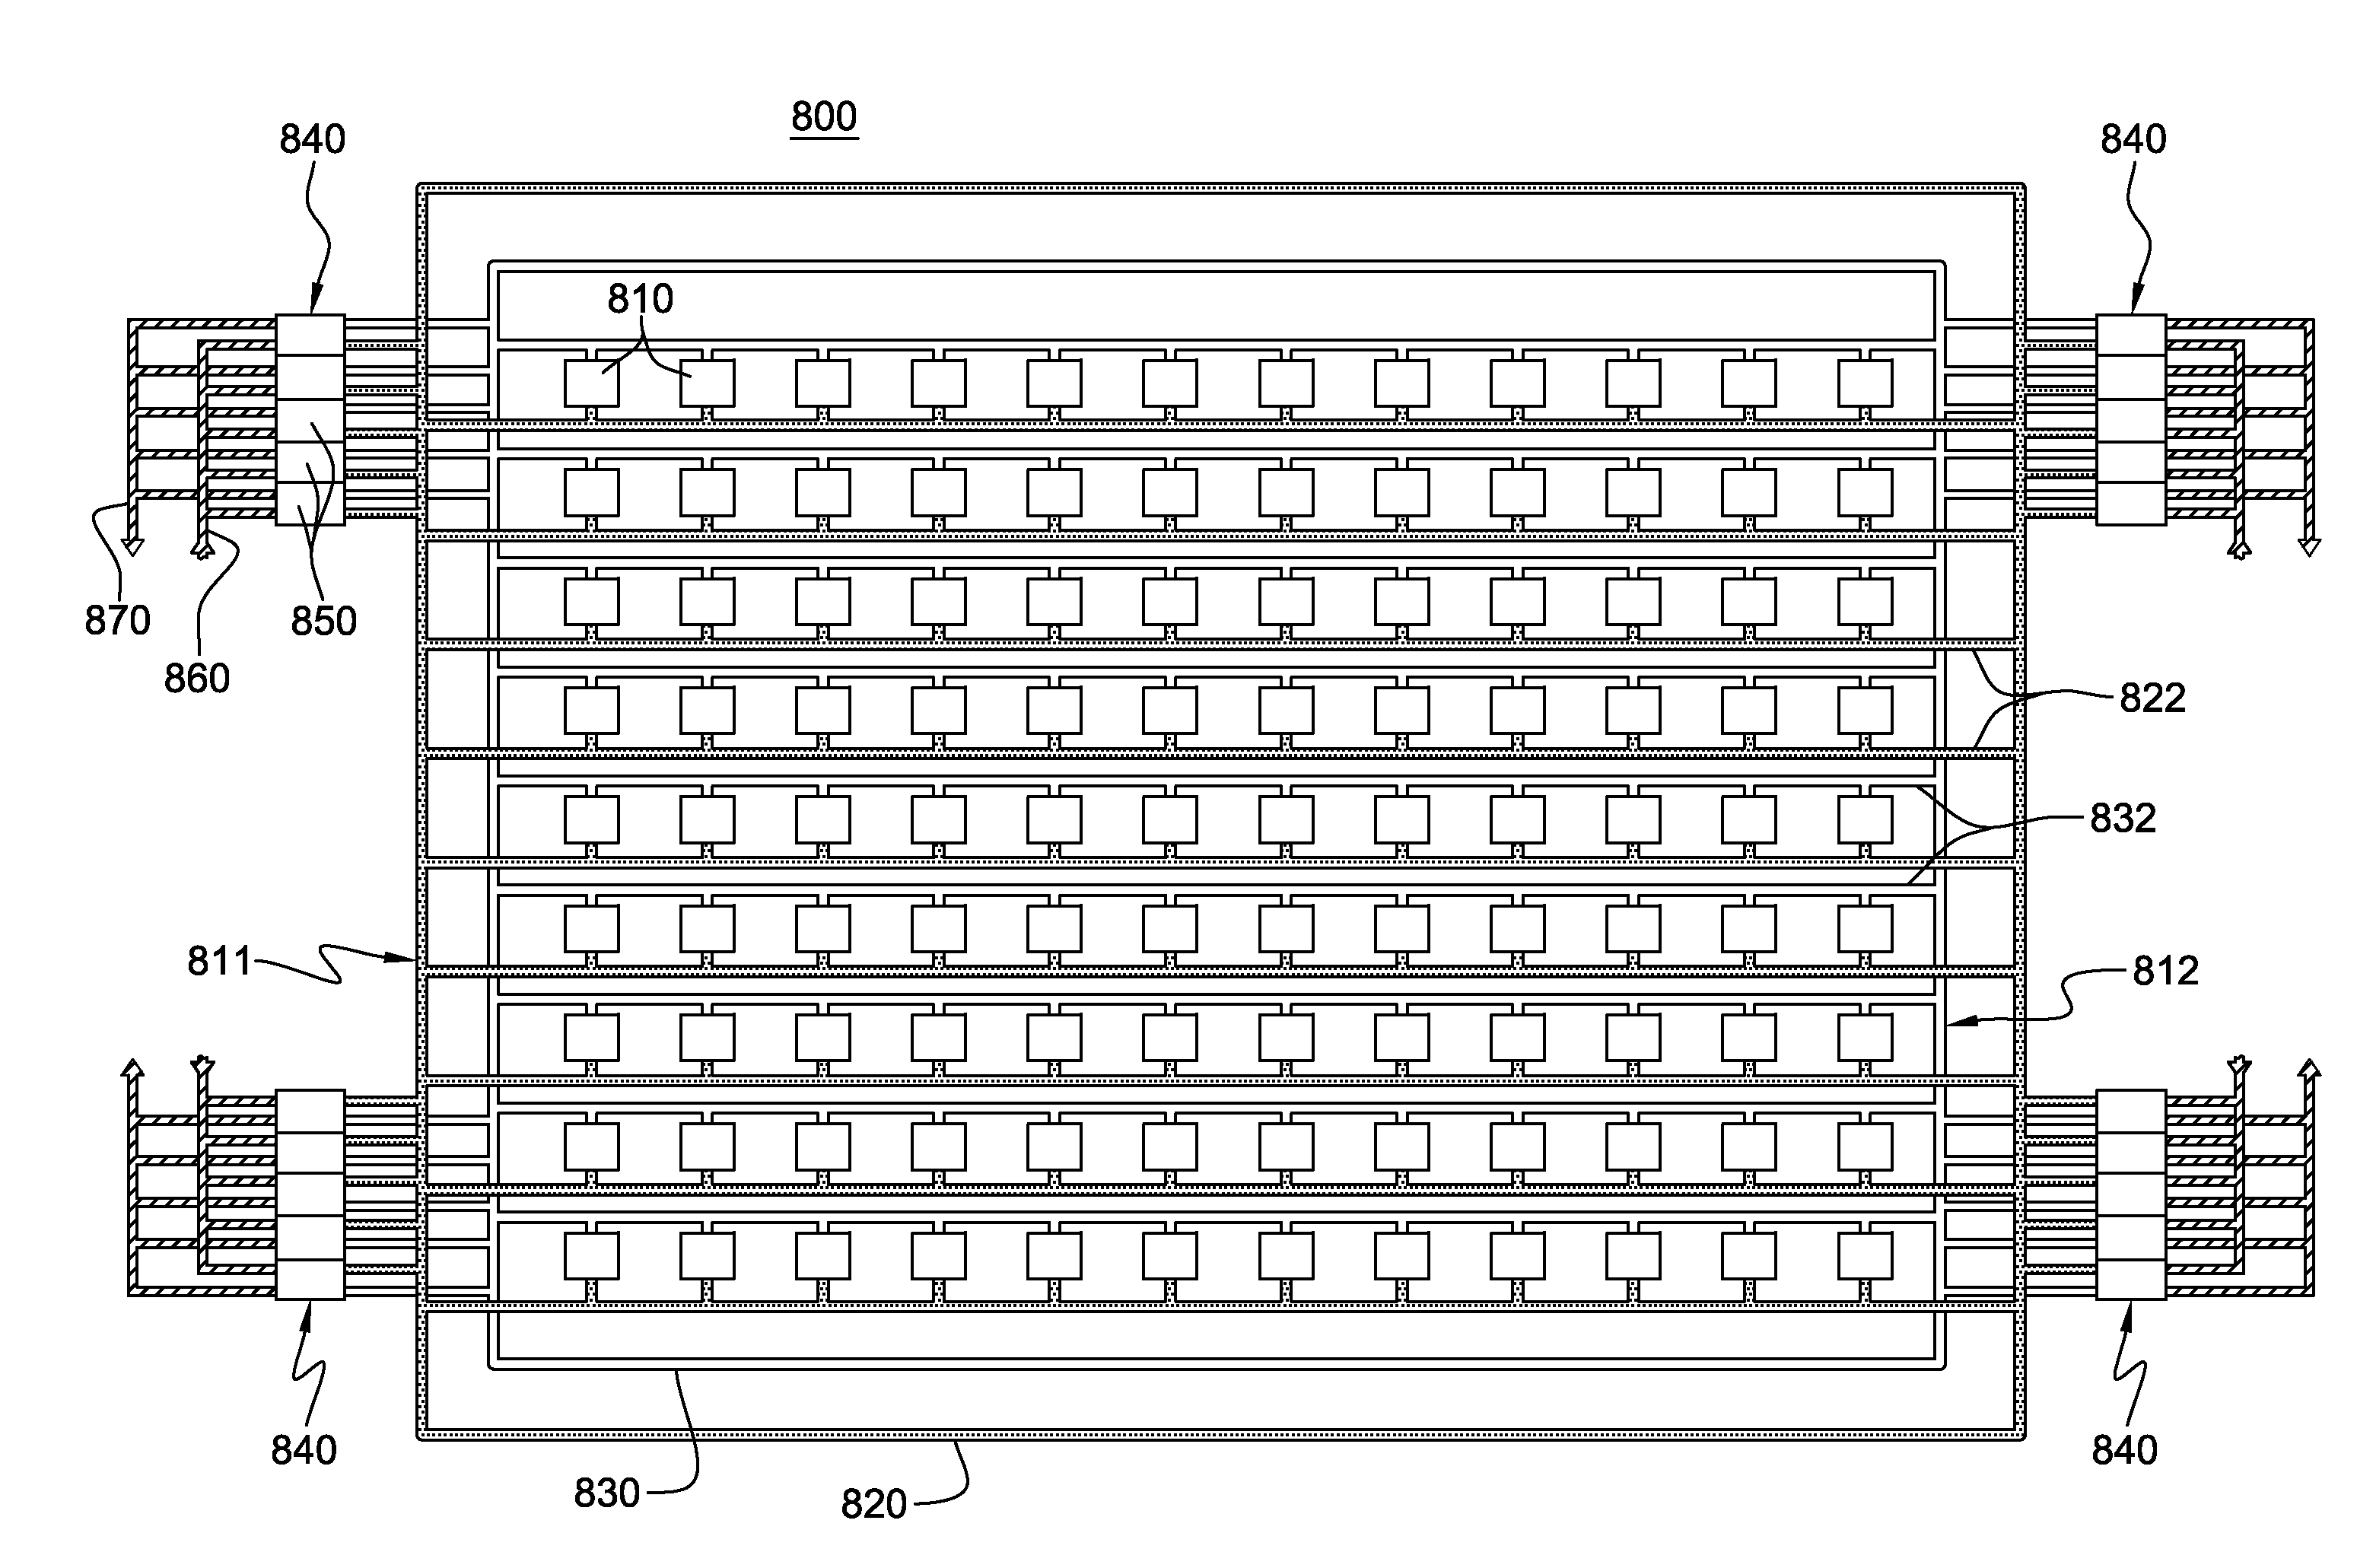 Cooling system and method minimizing power consumption in cooling liquid-cooled electronics racks